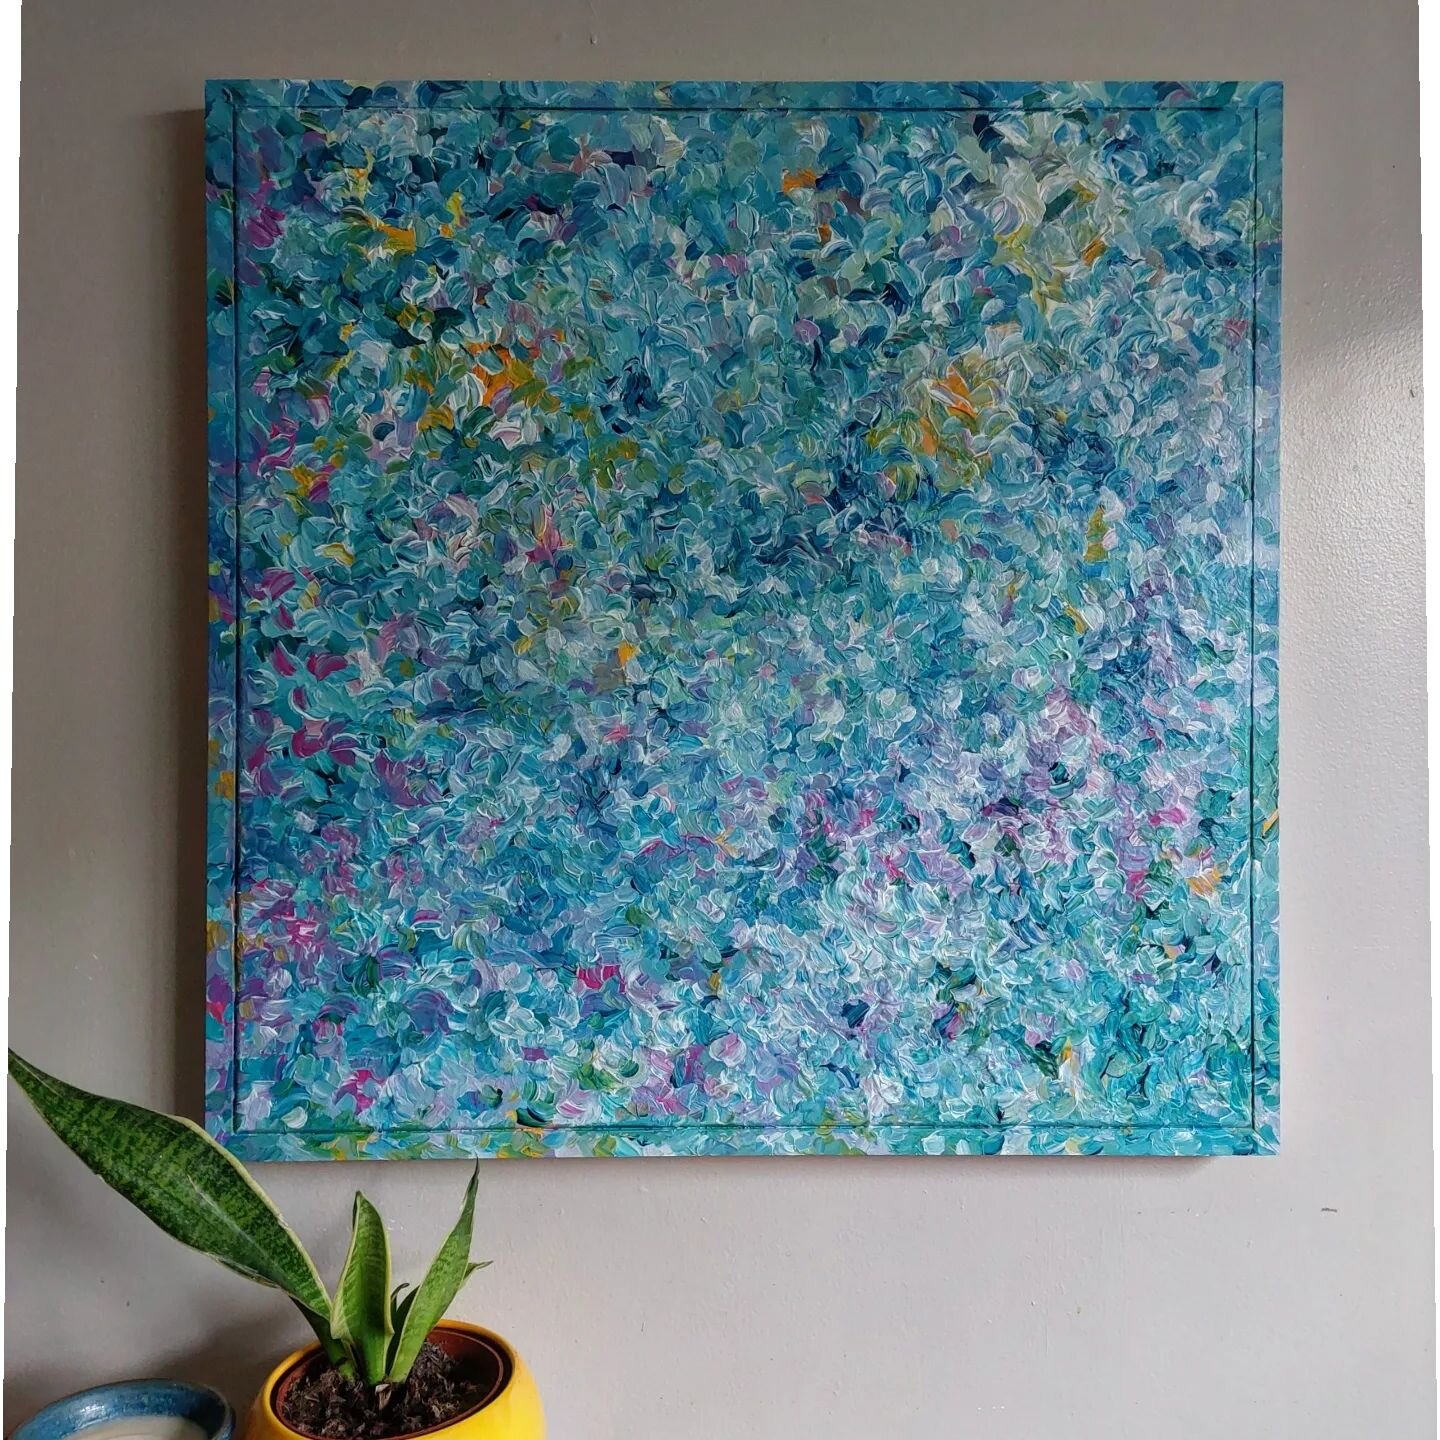 'Hydrangea Halo'
Acrylic on Canvas and Wood 
72 x 72 x 4 cms
&euro;275
Available 
DM for Enquiries 

I began this piece straight after the New Year began. Trying to keep between the frame and Canvas lines , was never going to work for me. So I went w